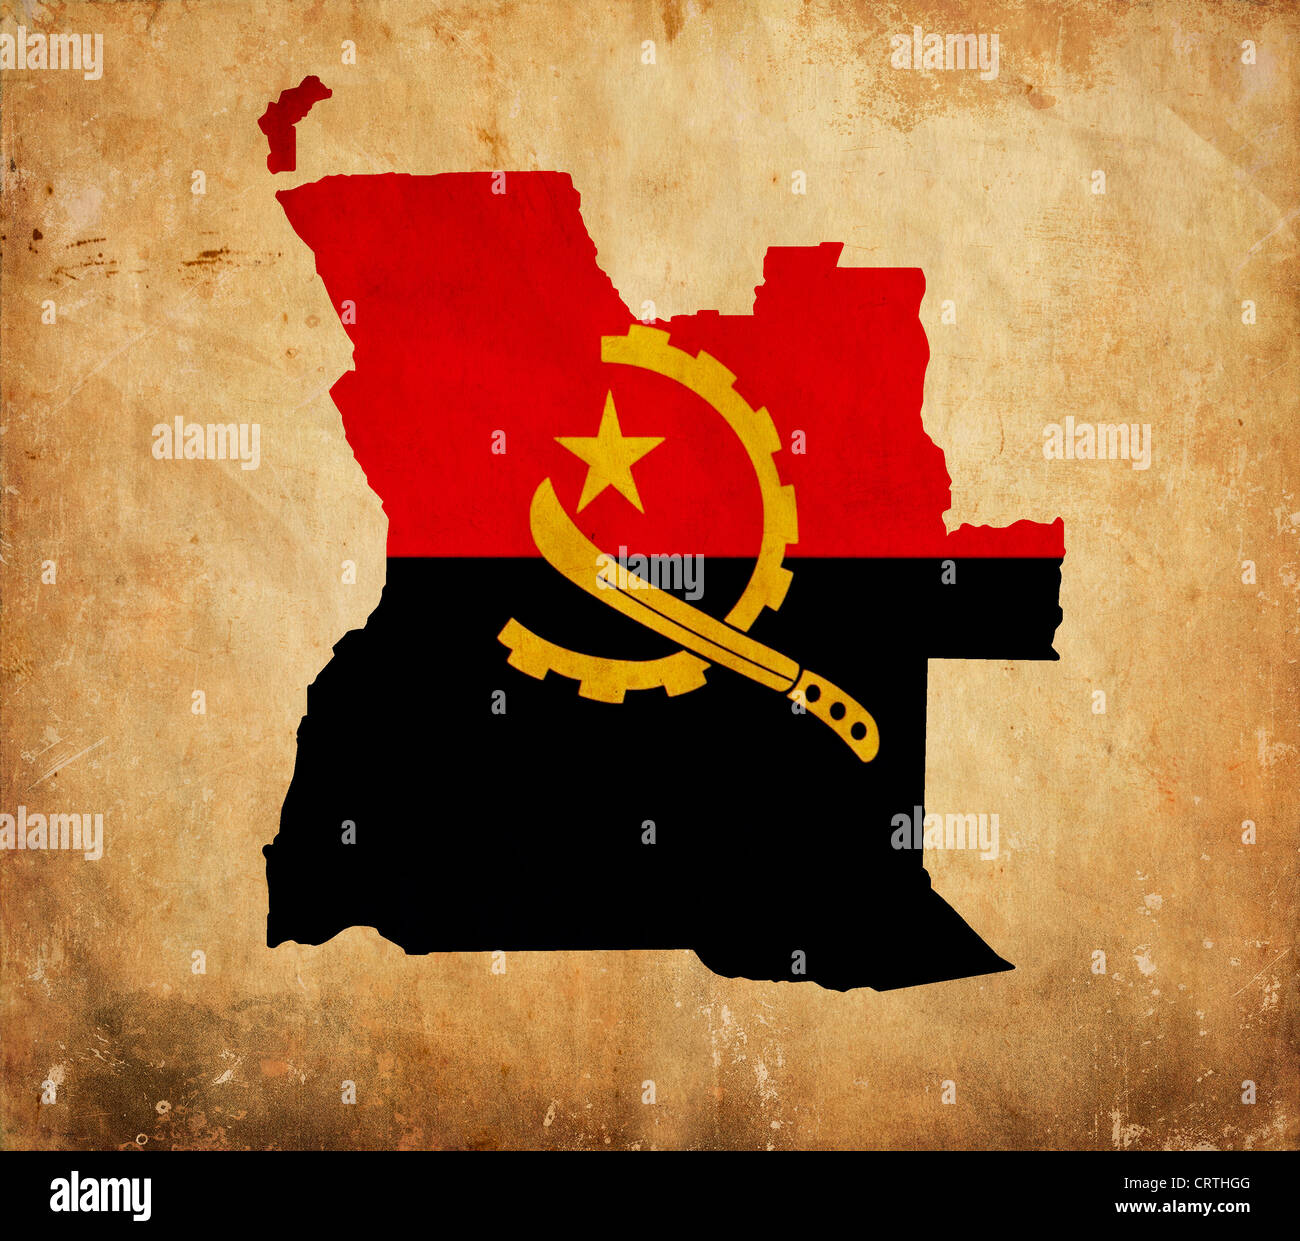 Vintage map of Angola on grunge paper Stock Photo